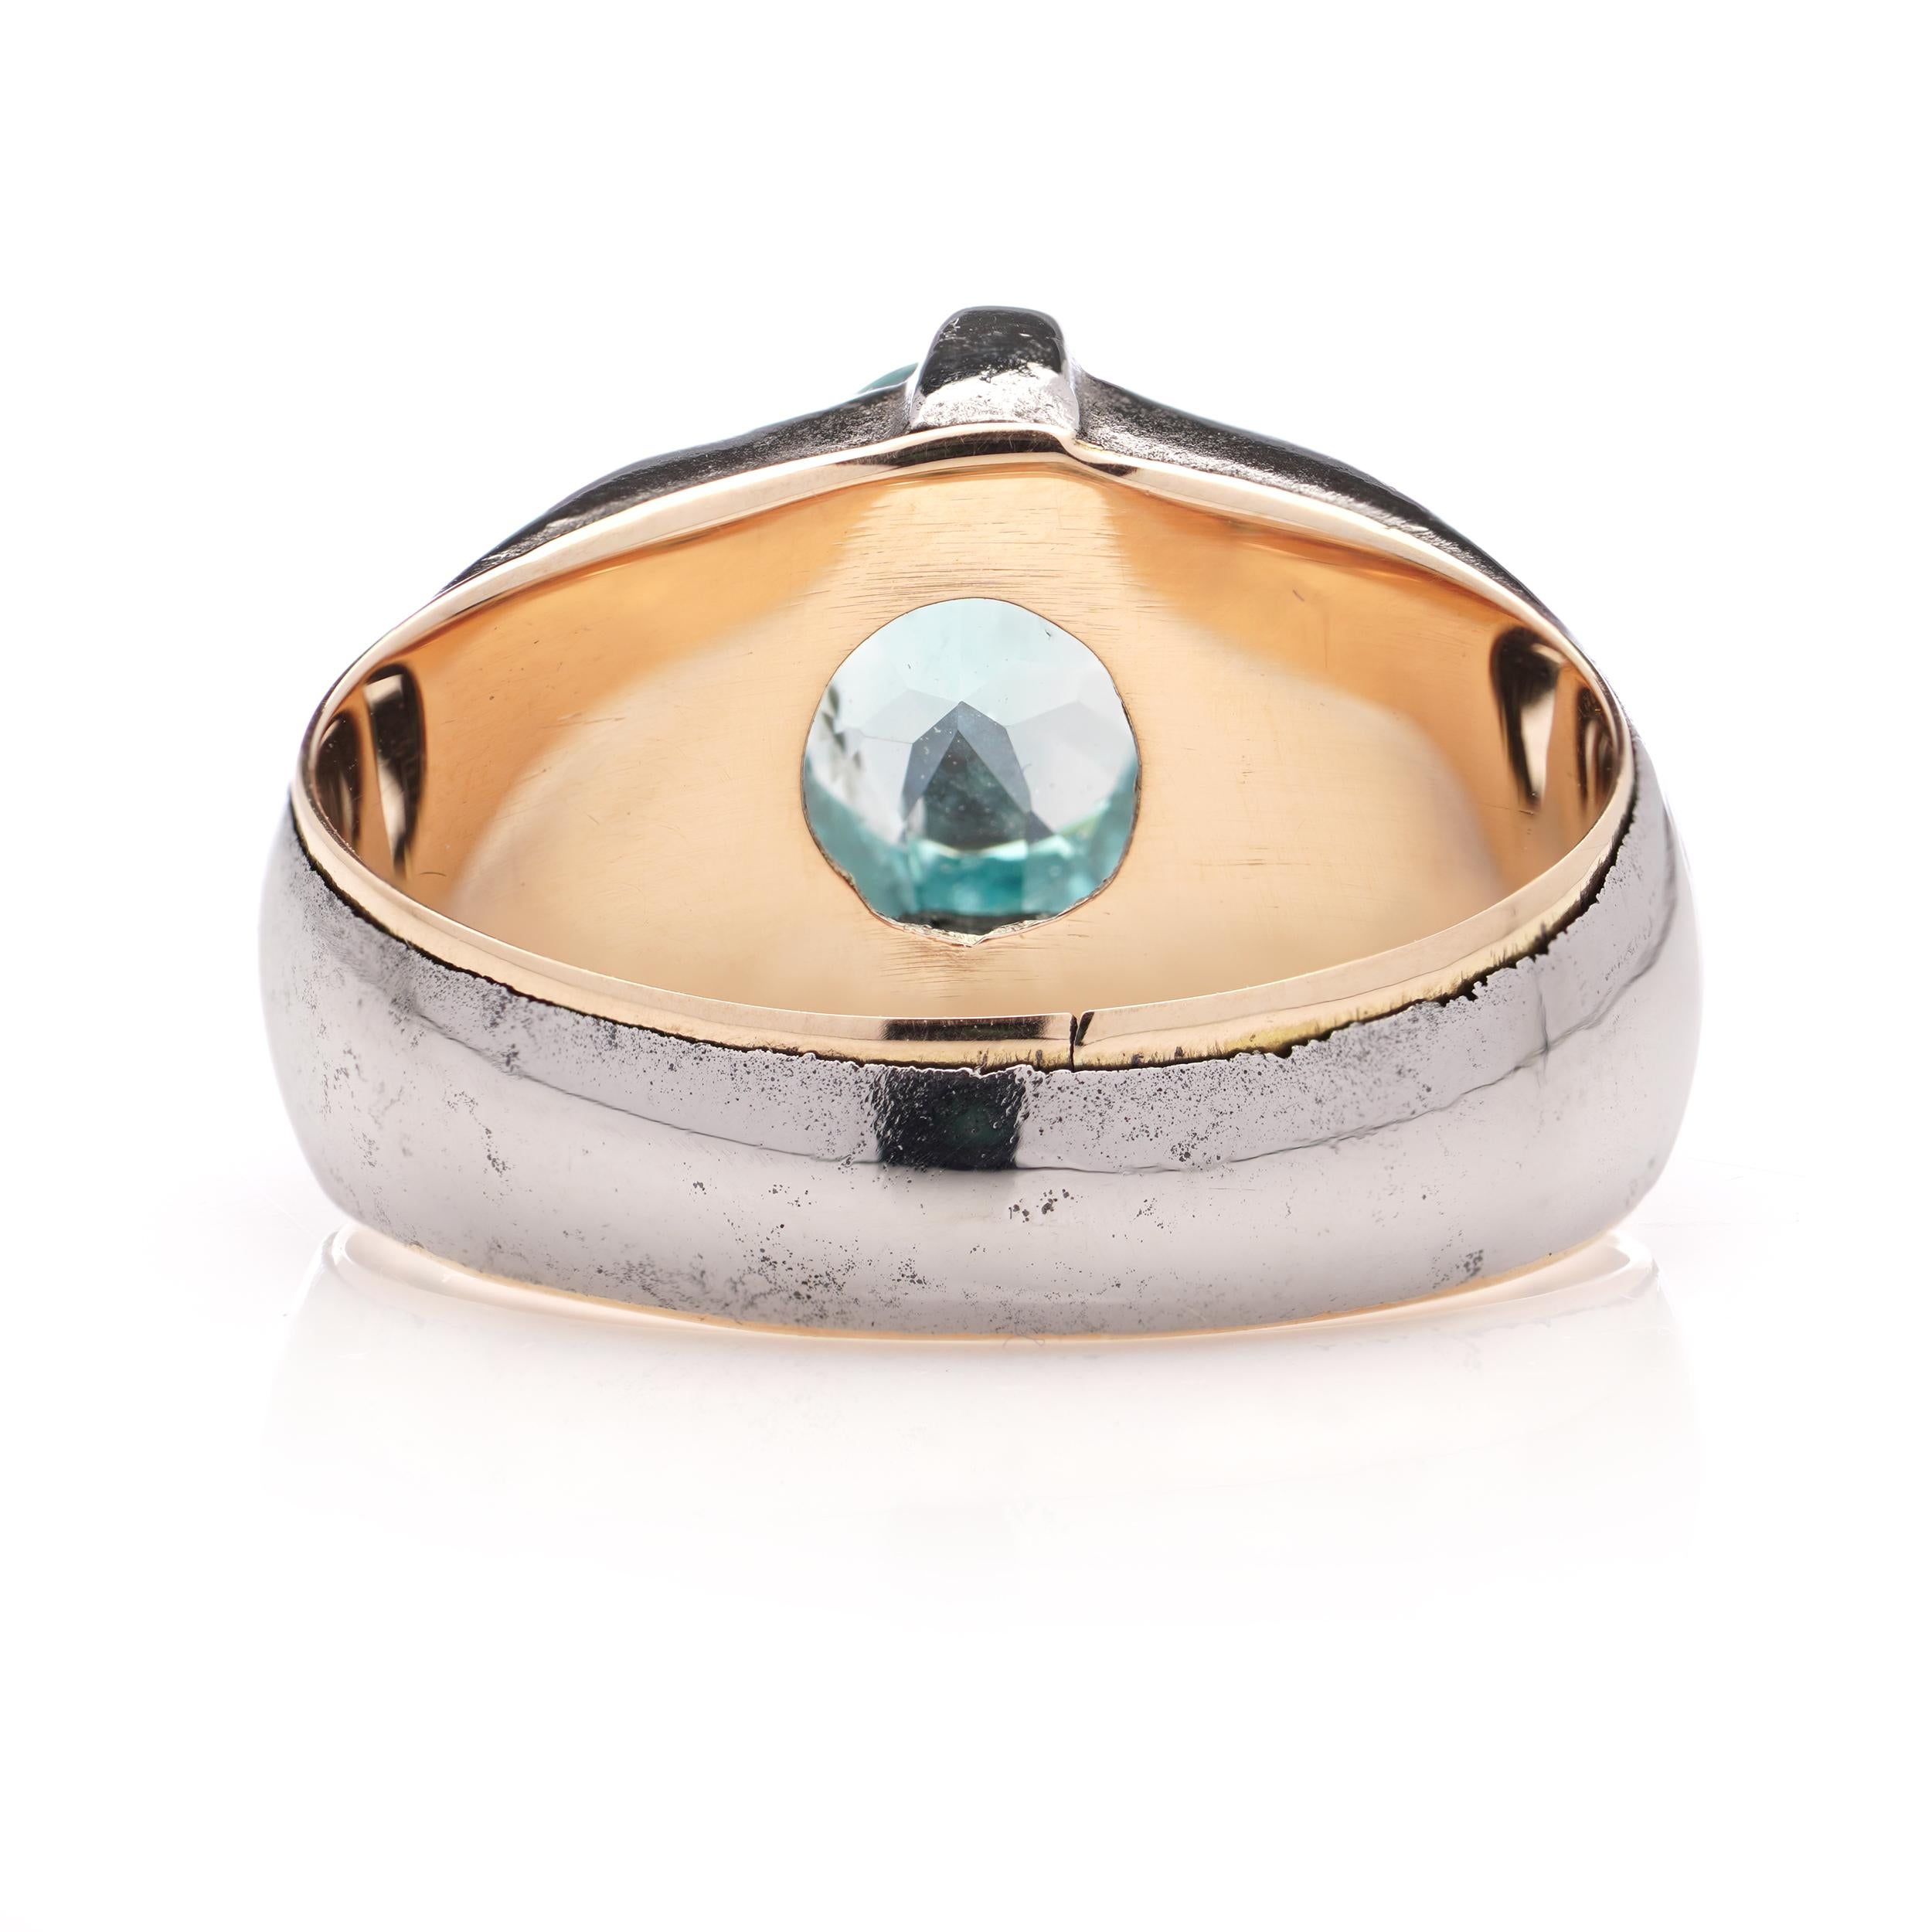 Women's 9kt pink gold and iron ring set with oval faceted 1.40 ct. blue topaz. For Sale